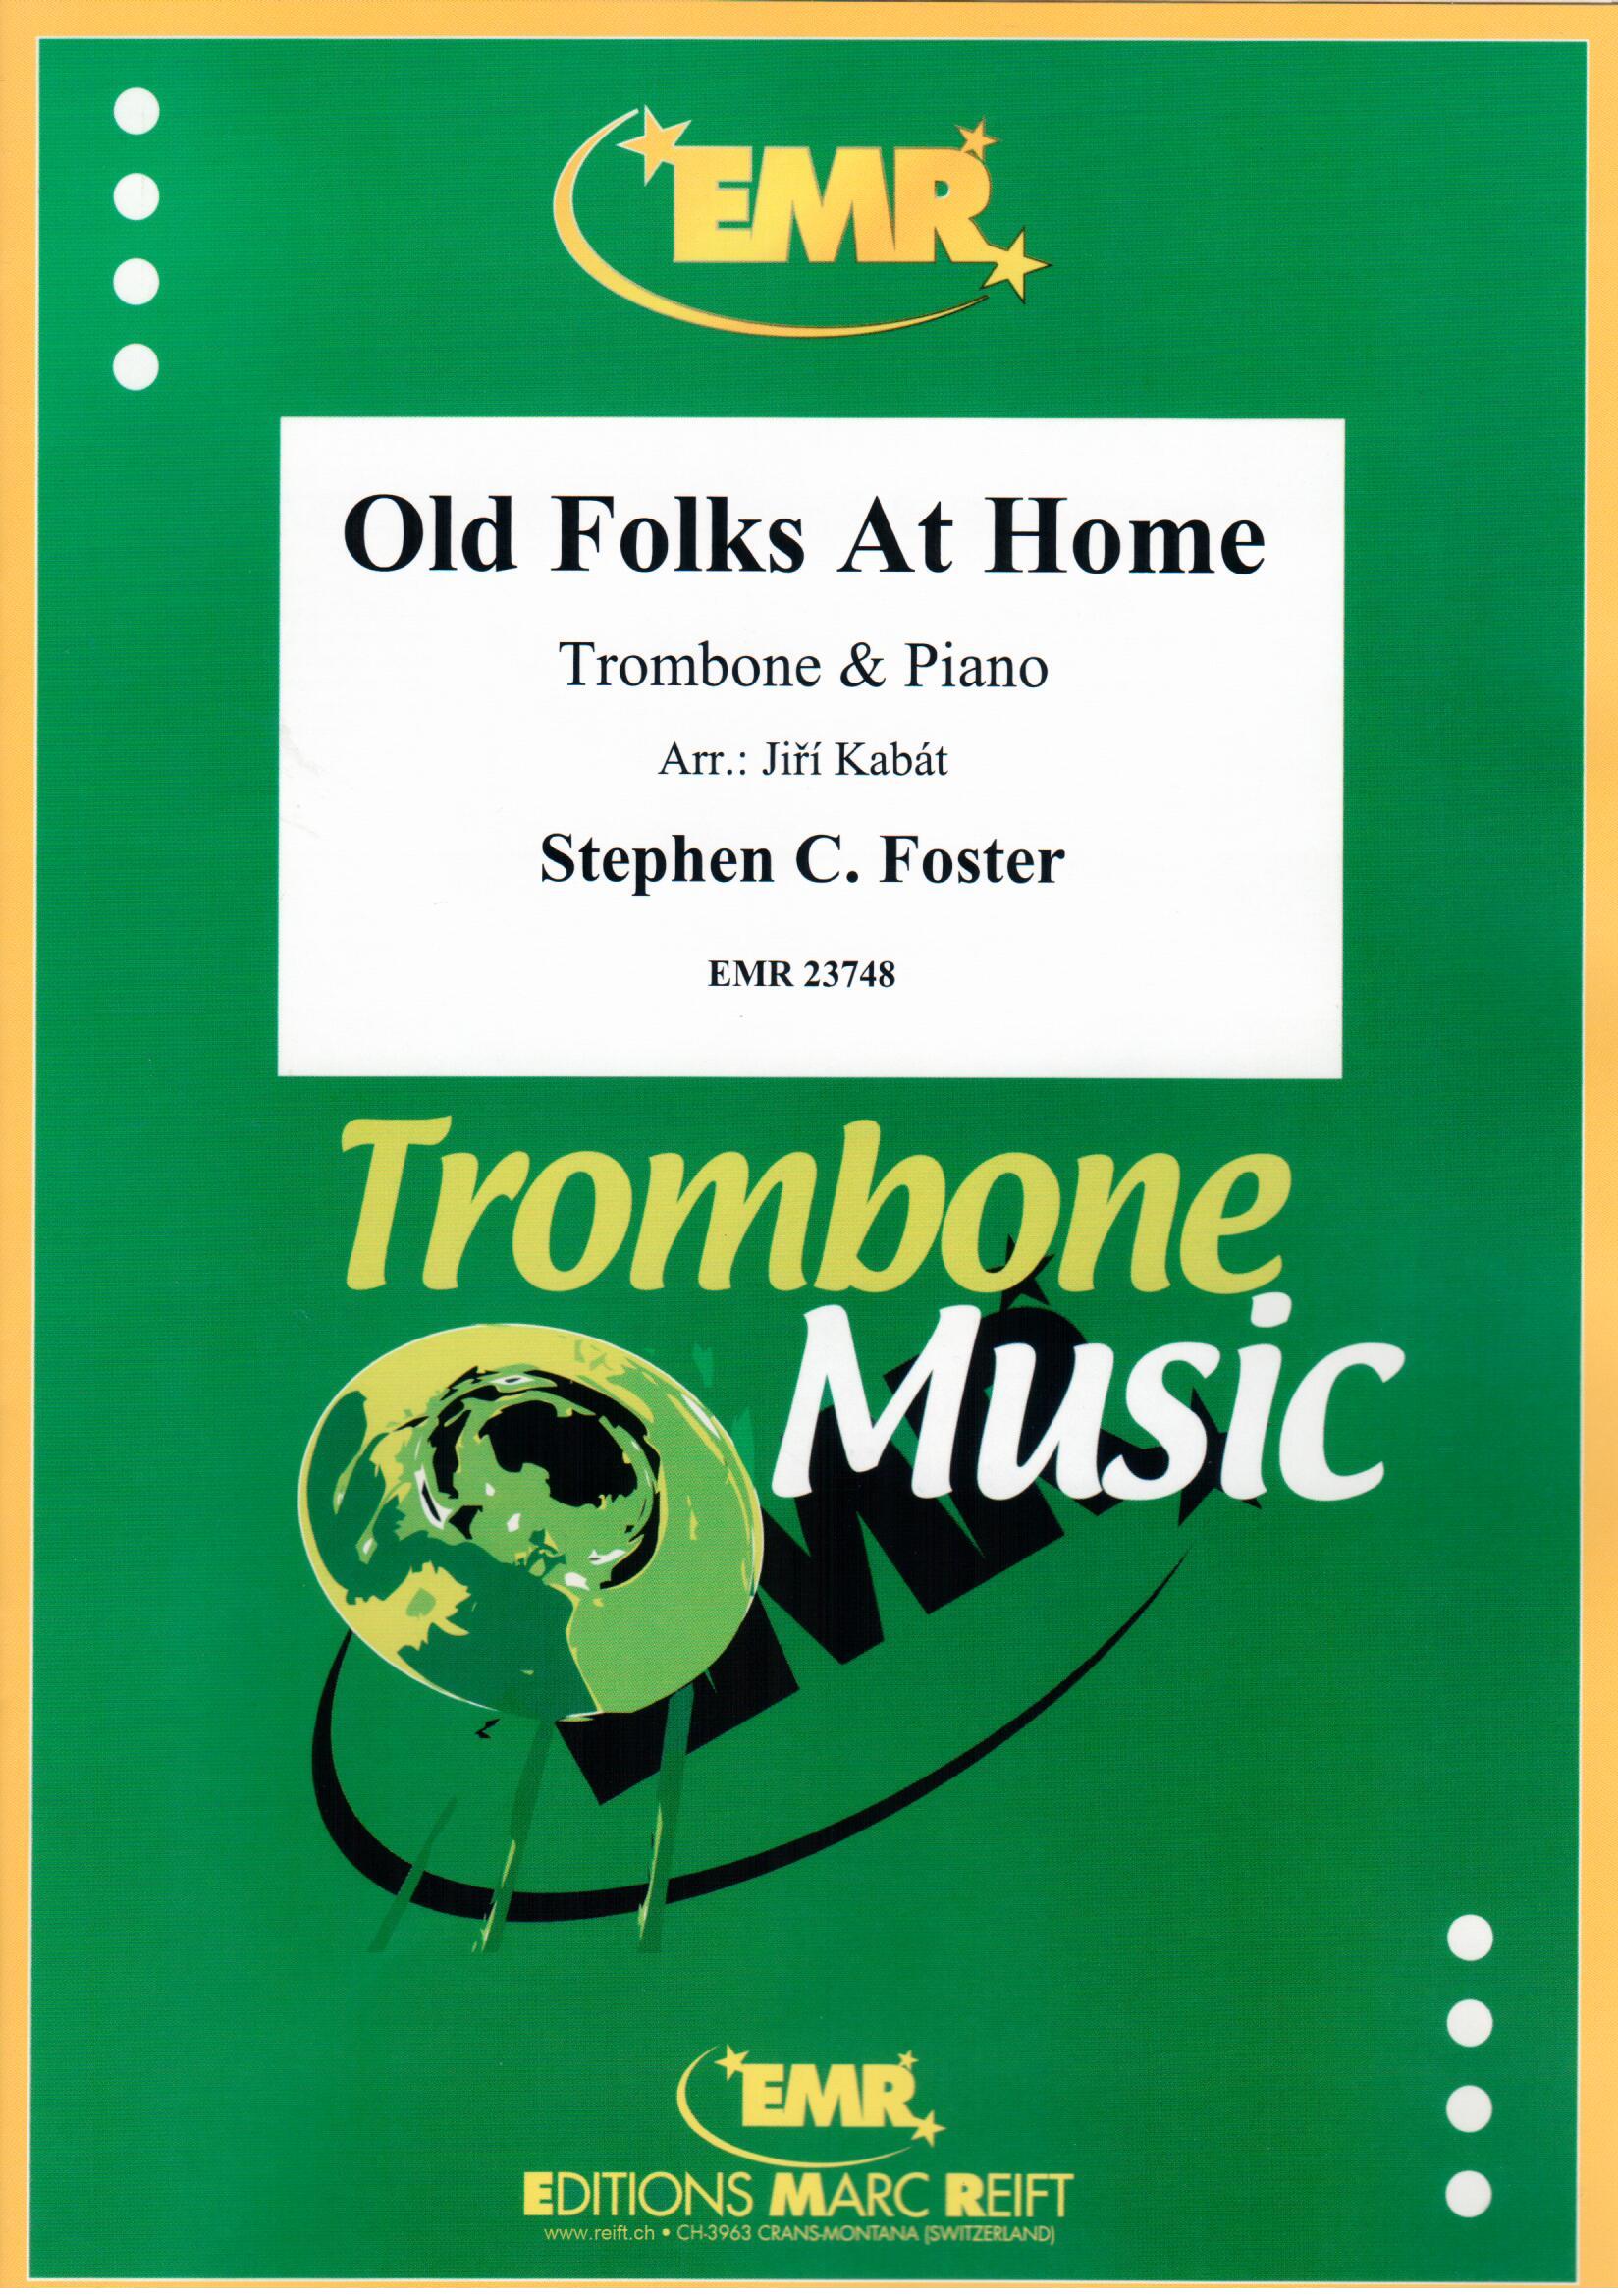 OLD FOLKS AT HOME, SOLOS - Trombone